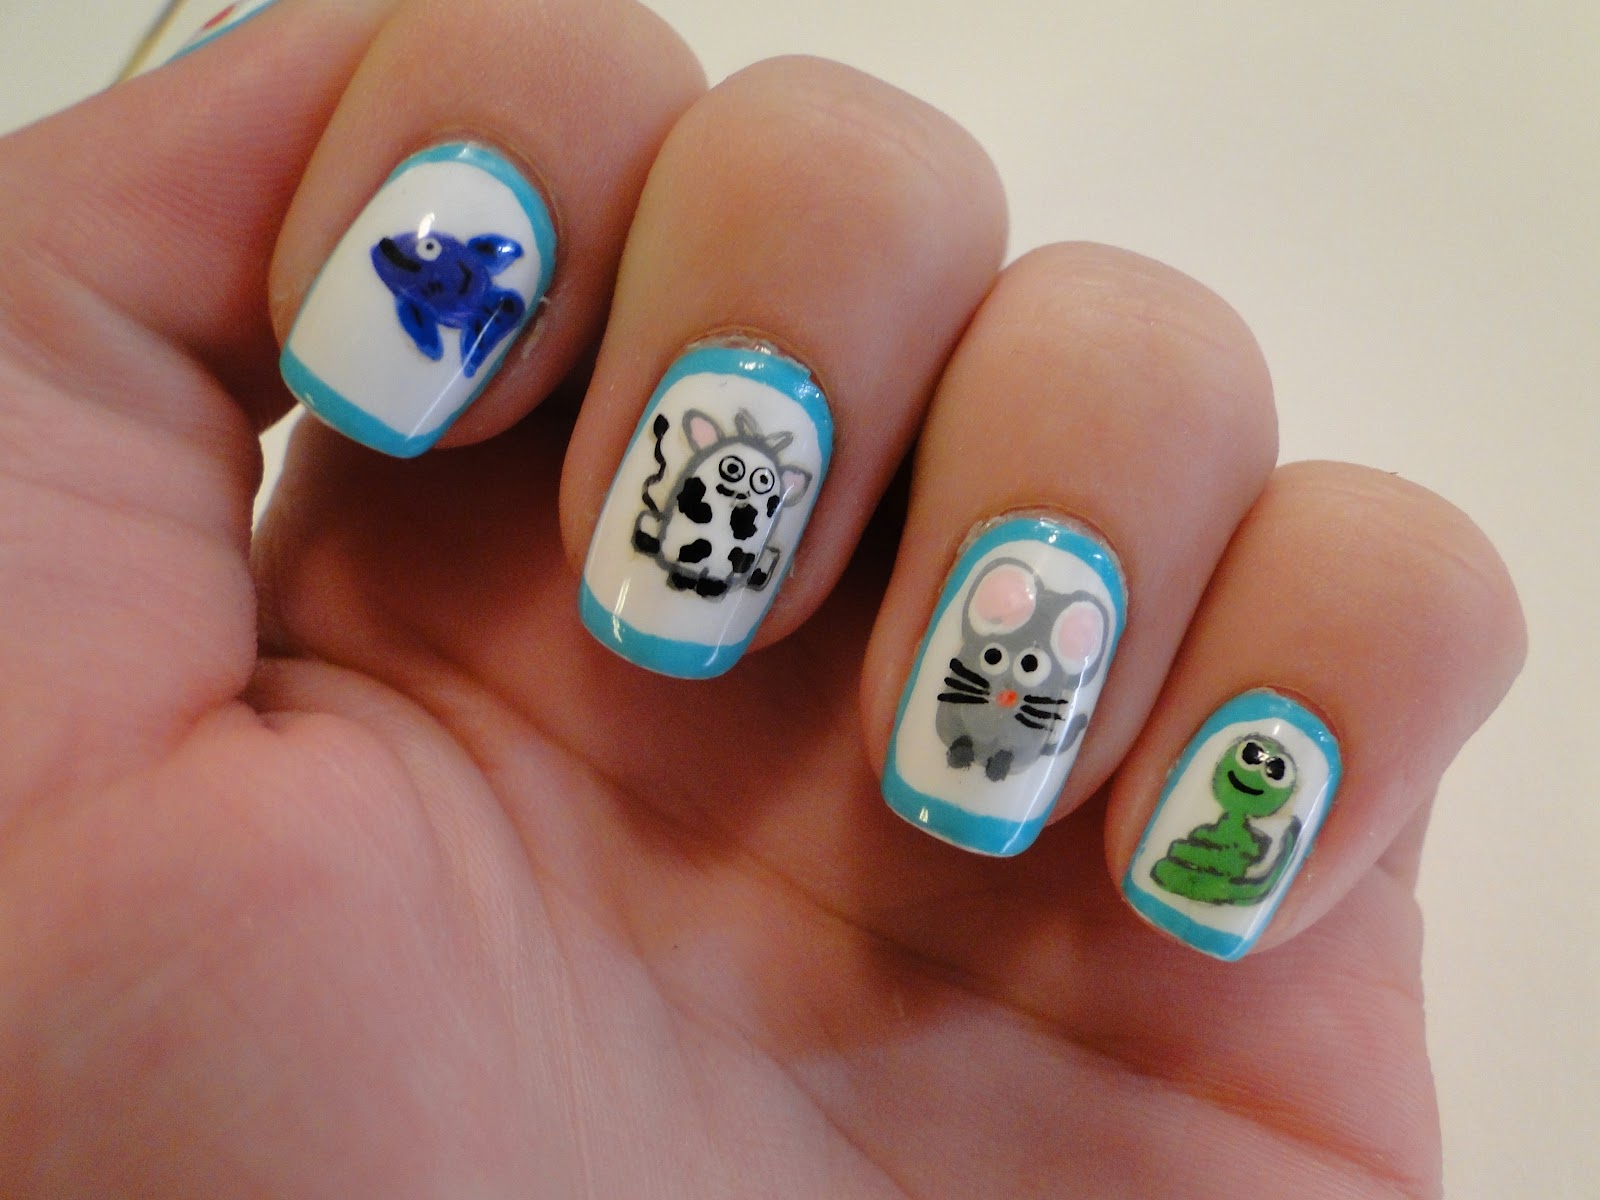 8. Step by Step Guide to Creating Cute Animal Nail Art - wide 9